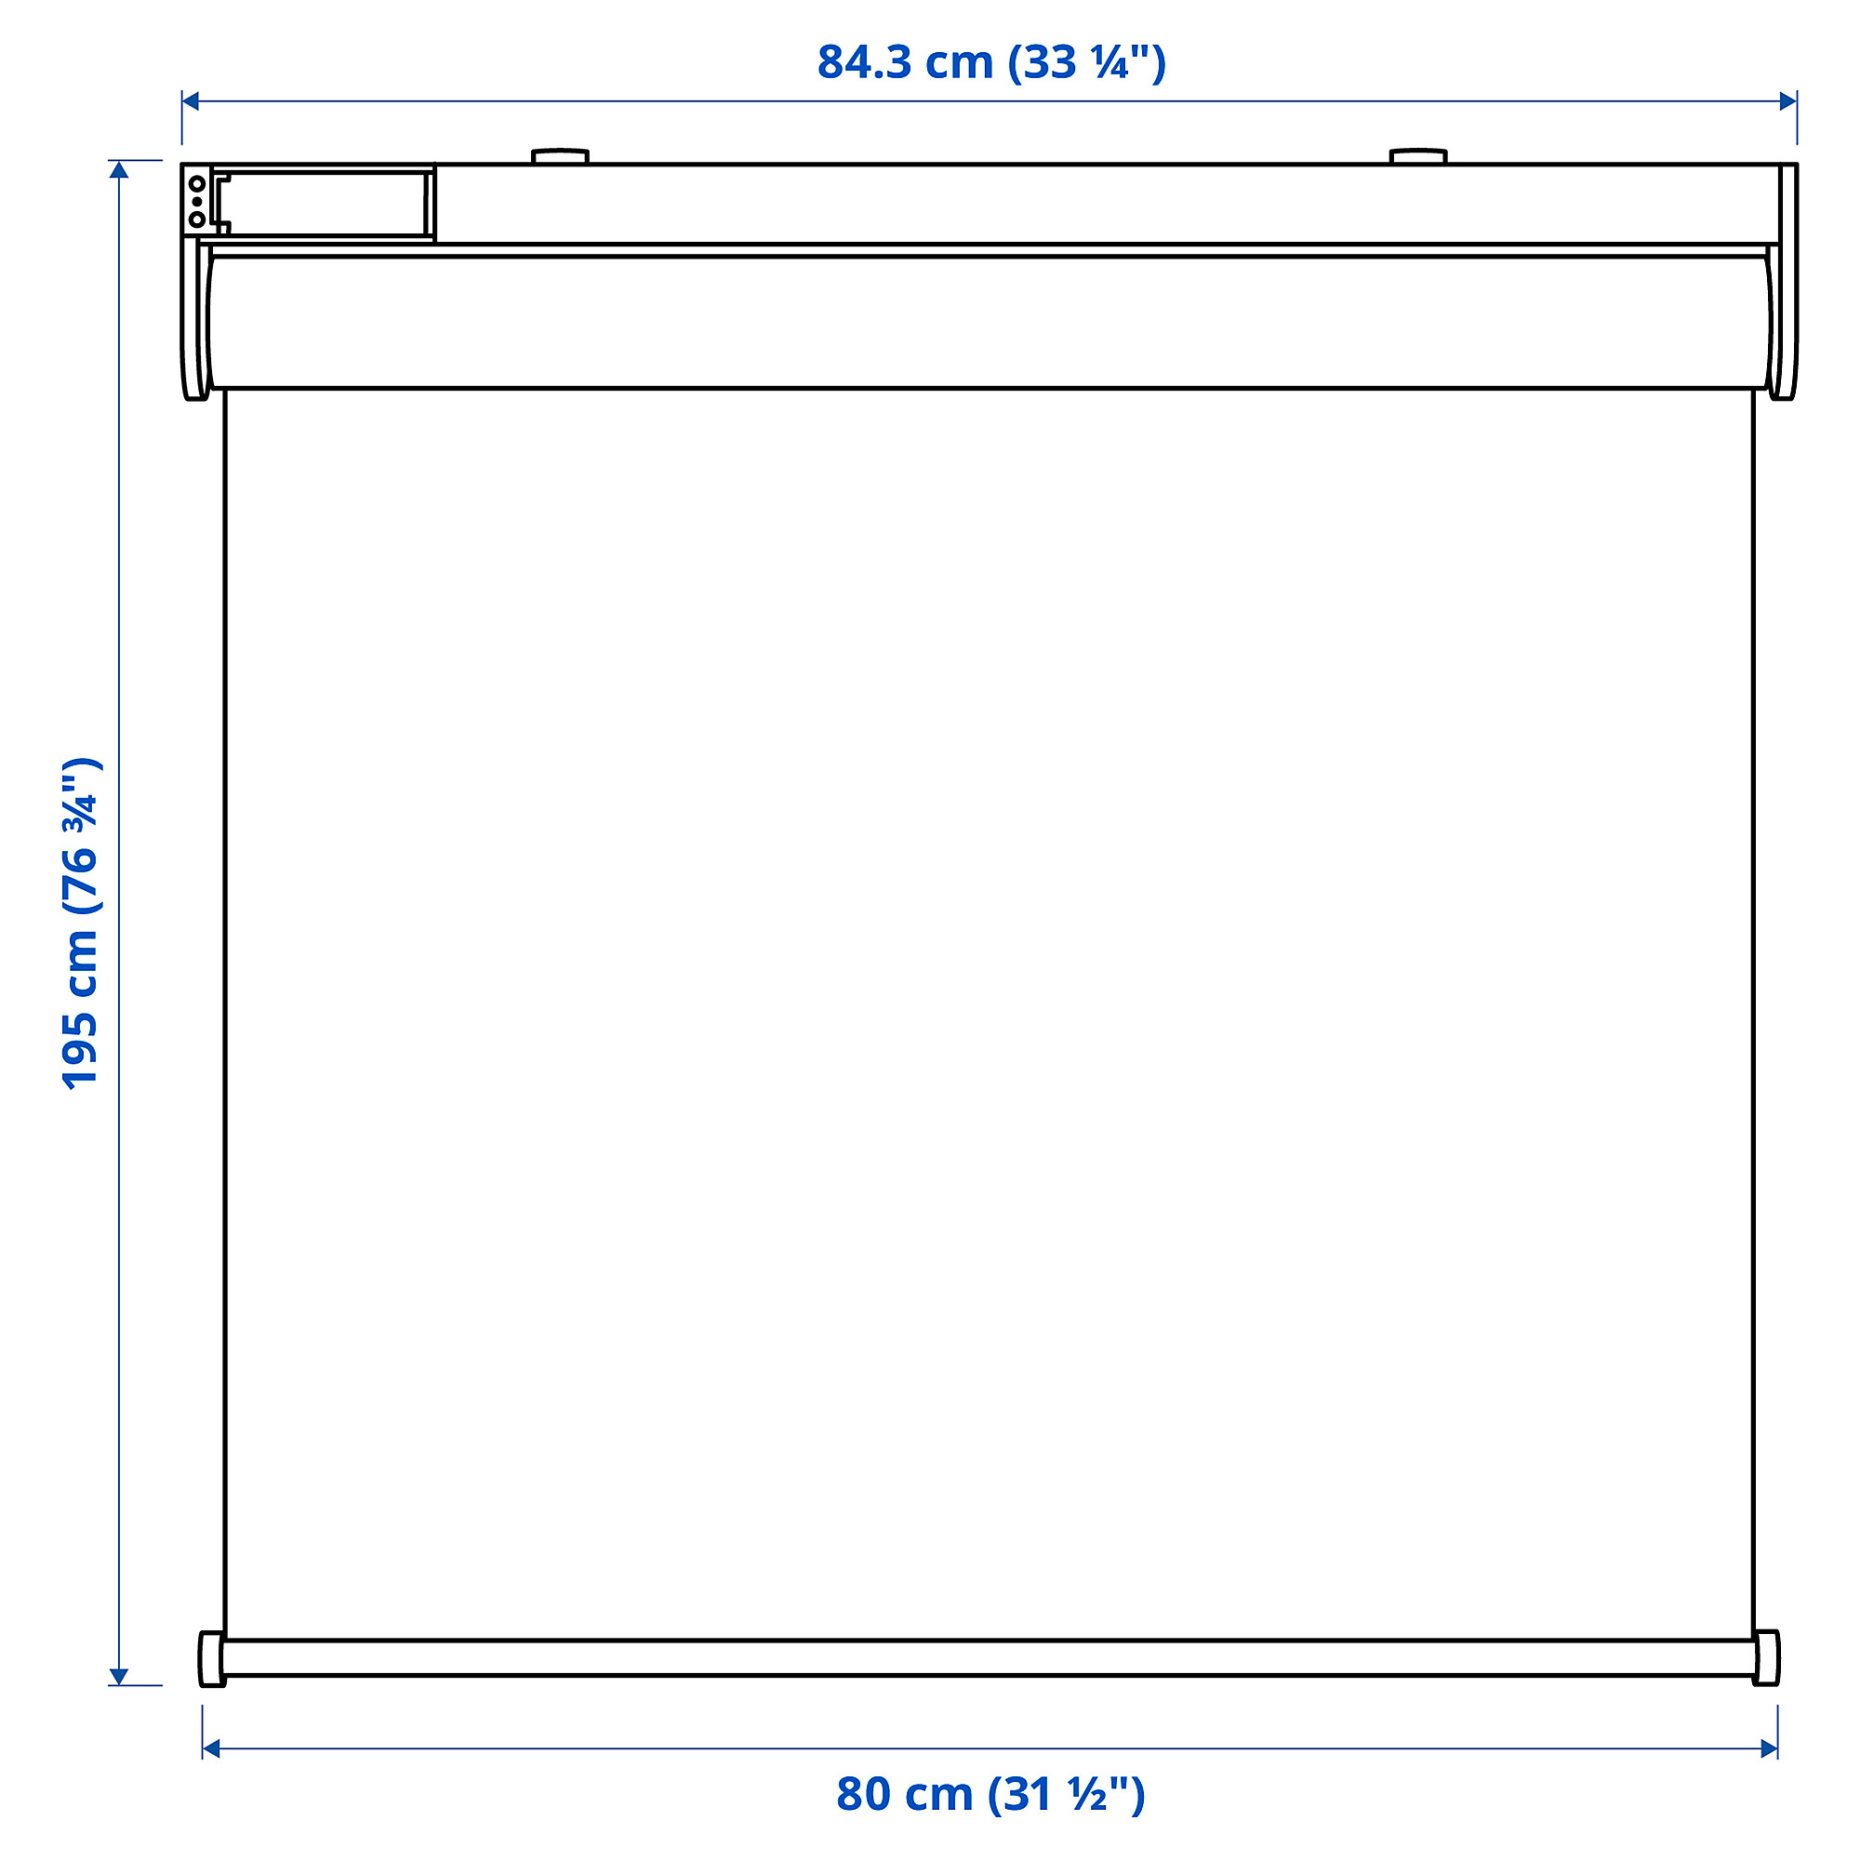 FYRTUR, block-out roller blind wireless/battery-operated, 504.082.09